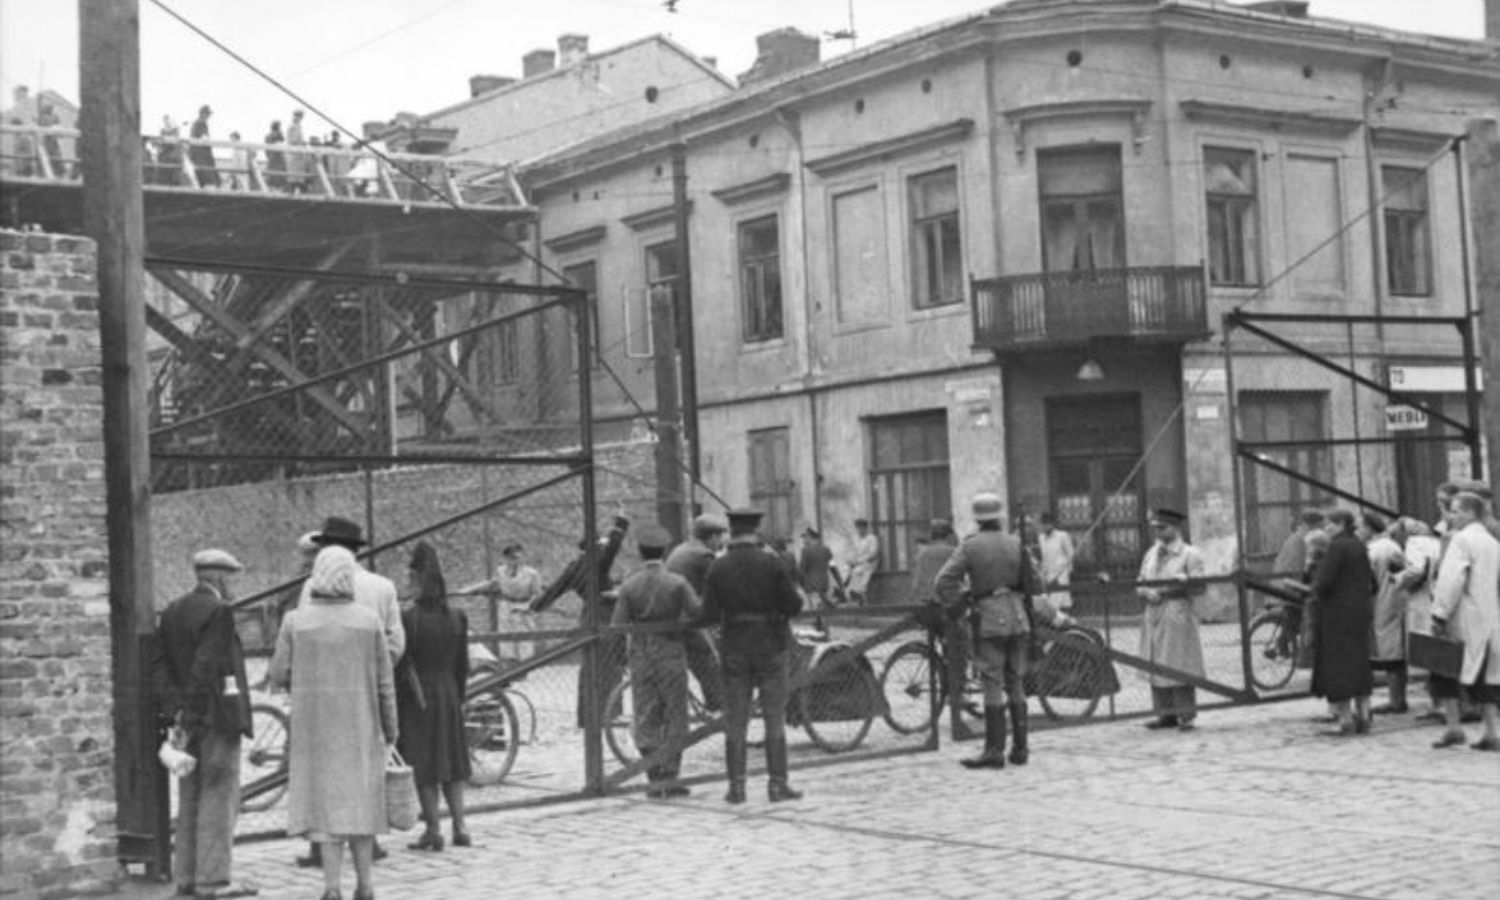 OTD in 1943: The Warsaw Uprising involved Jews in the Warsaw Ghetto resisting Nazi Germany during WWII.